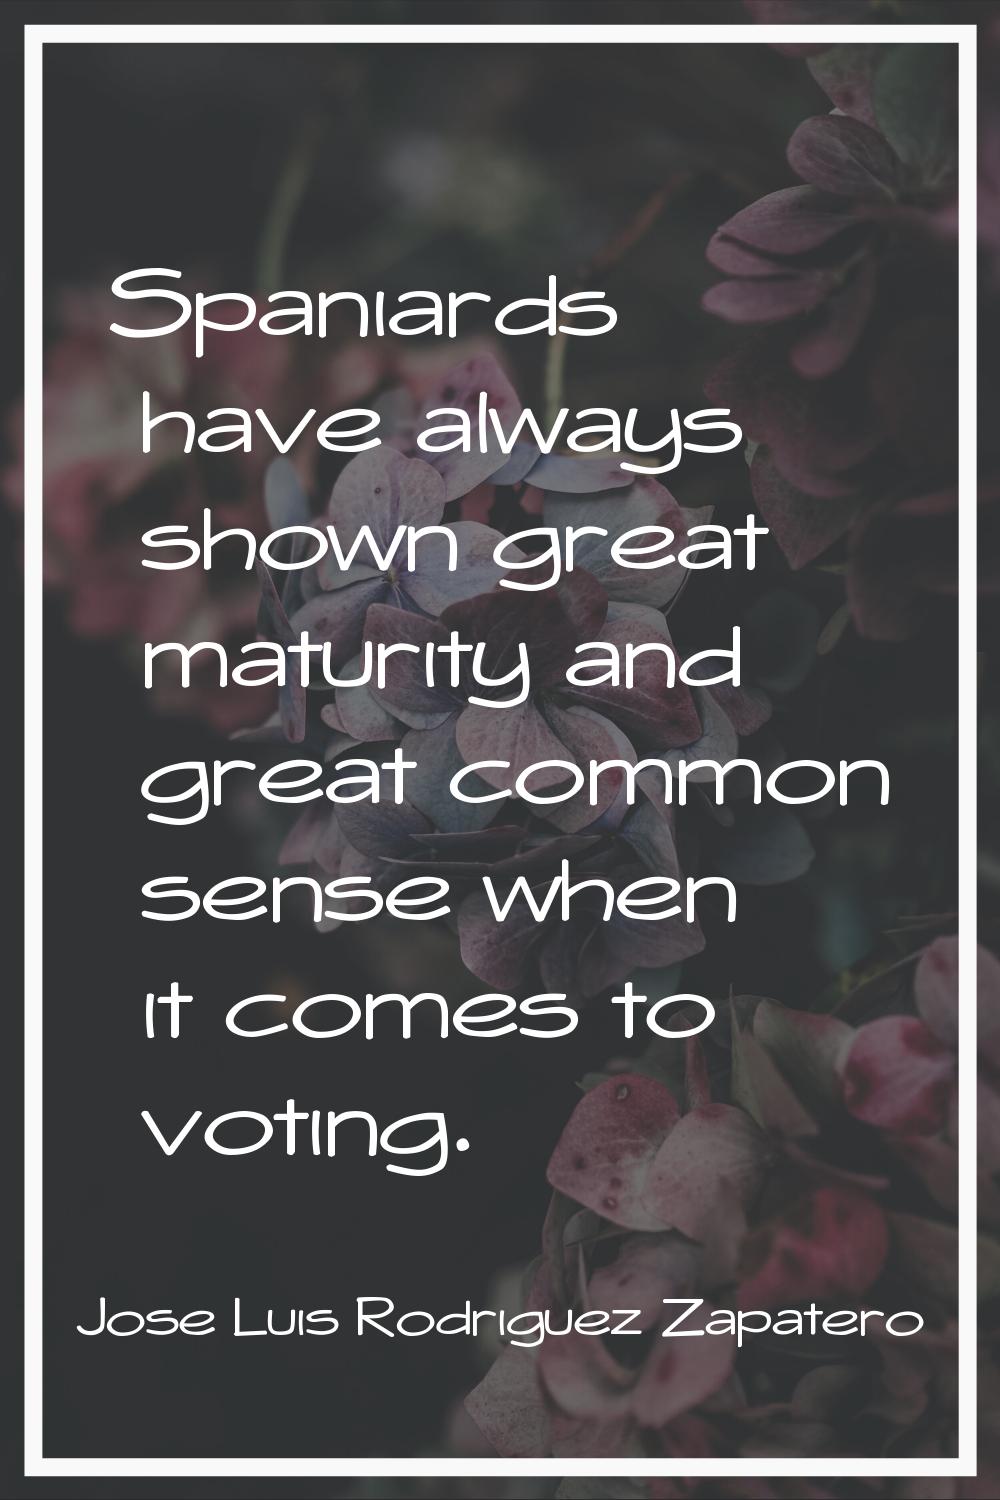 Spaniards have always shown great maturity and great common sense when it comes to voting.